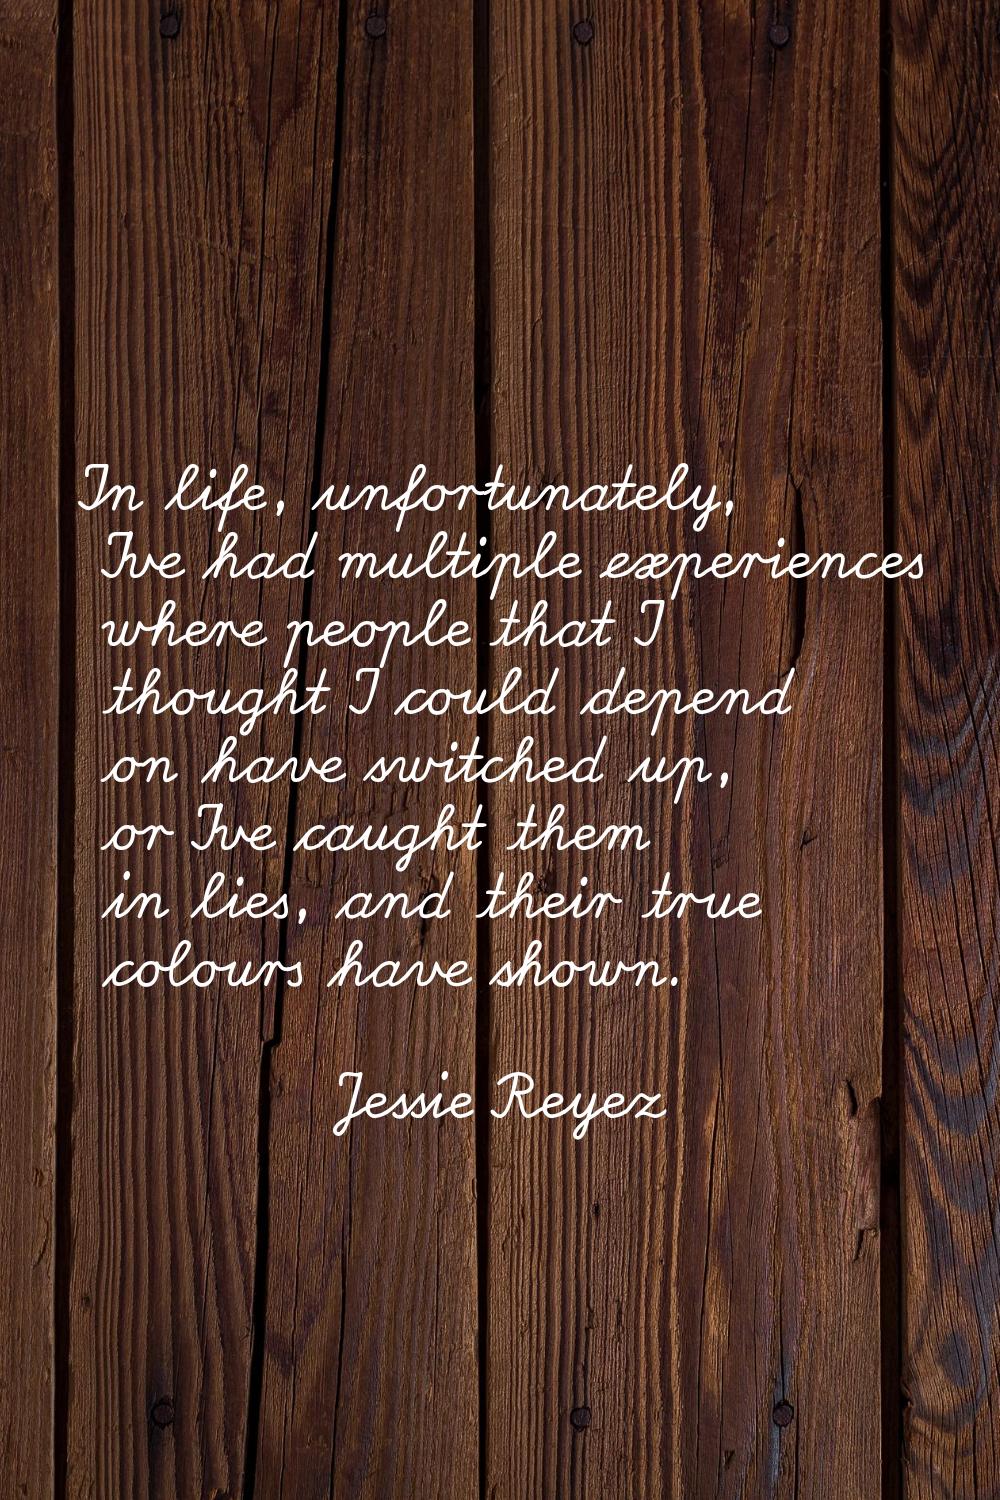 In life, unfortunately, I've had multiple experiences where people that I thought I could depend on